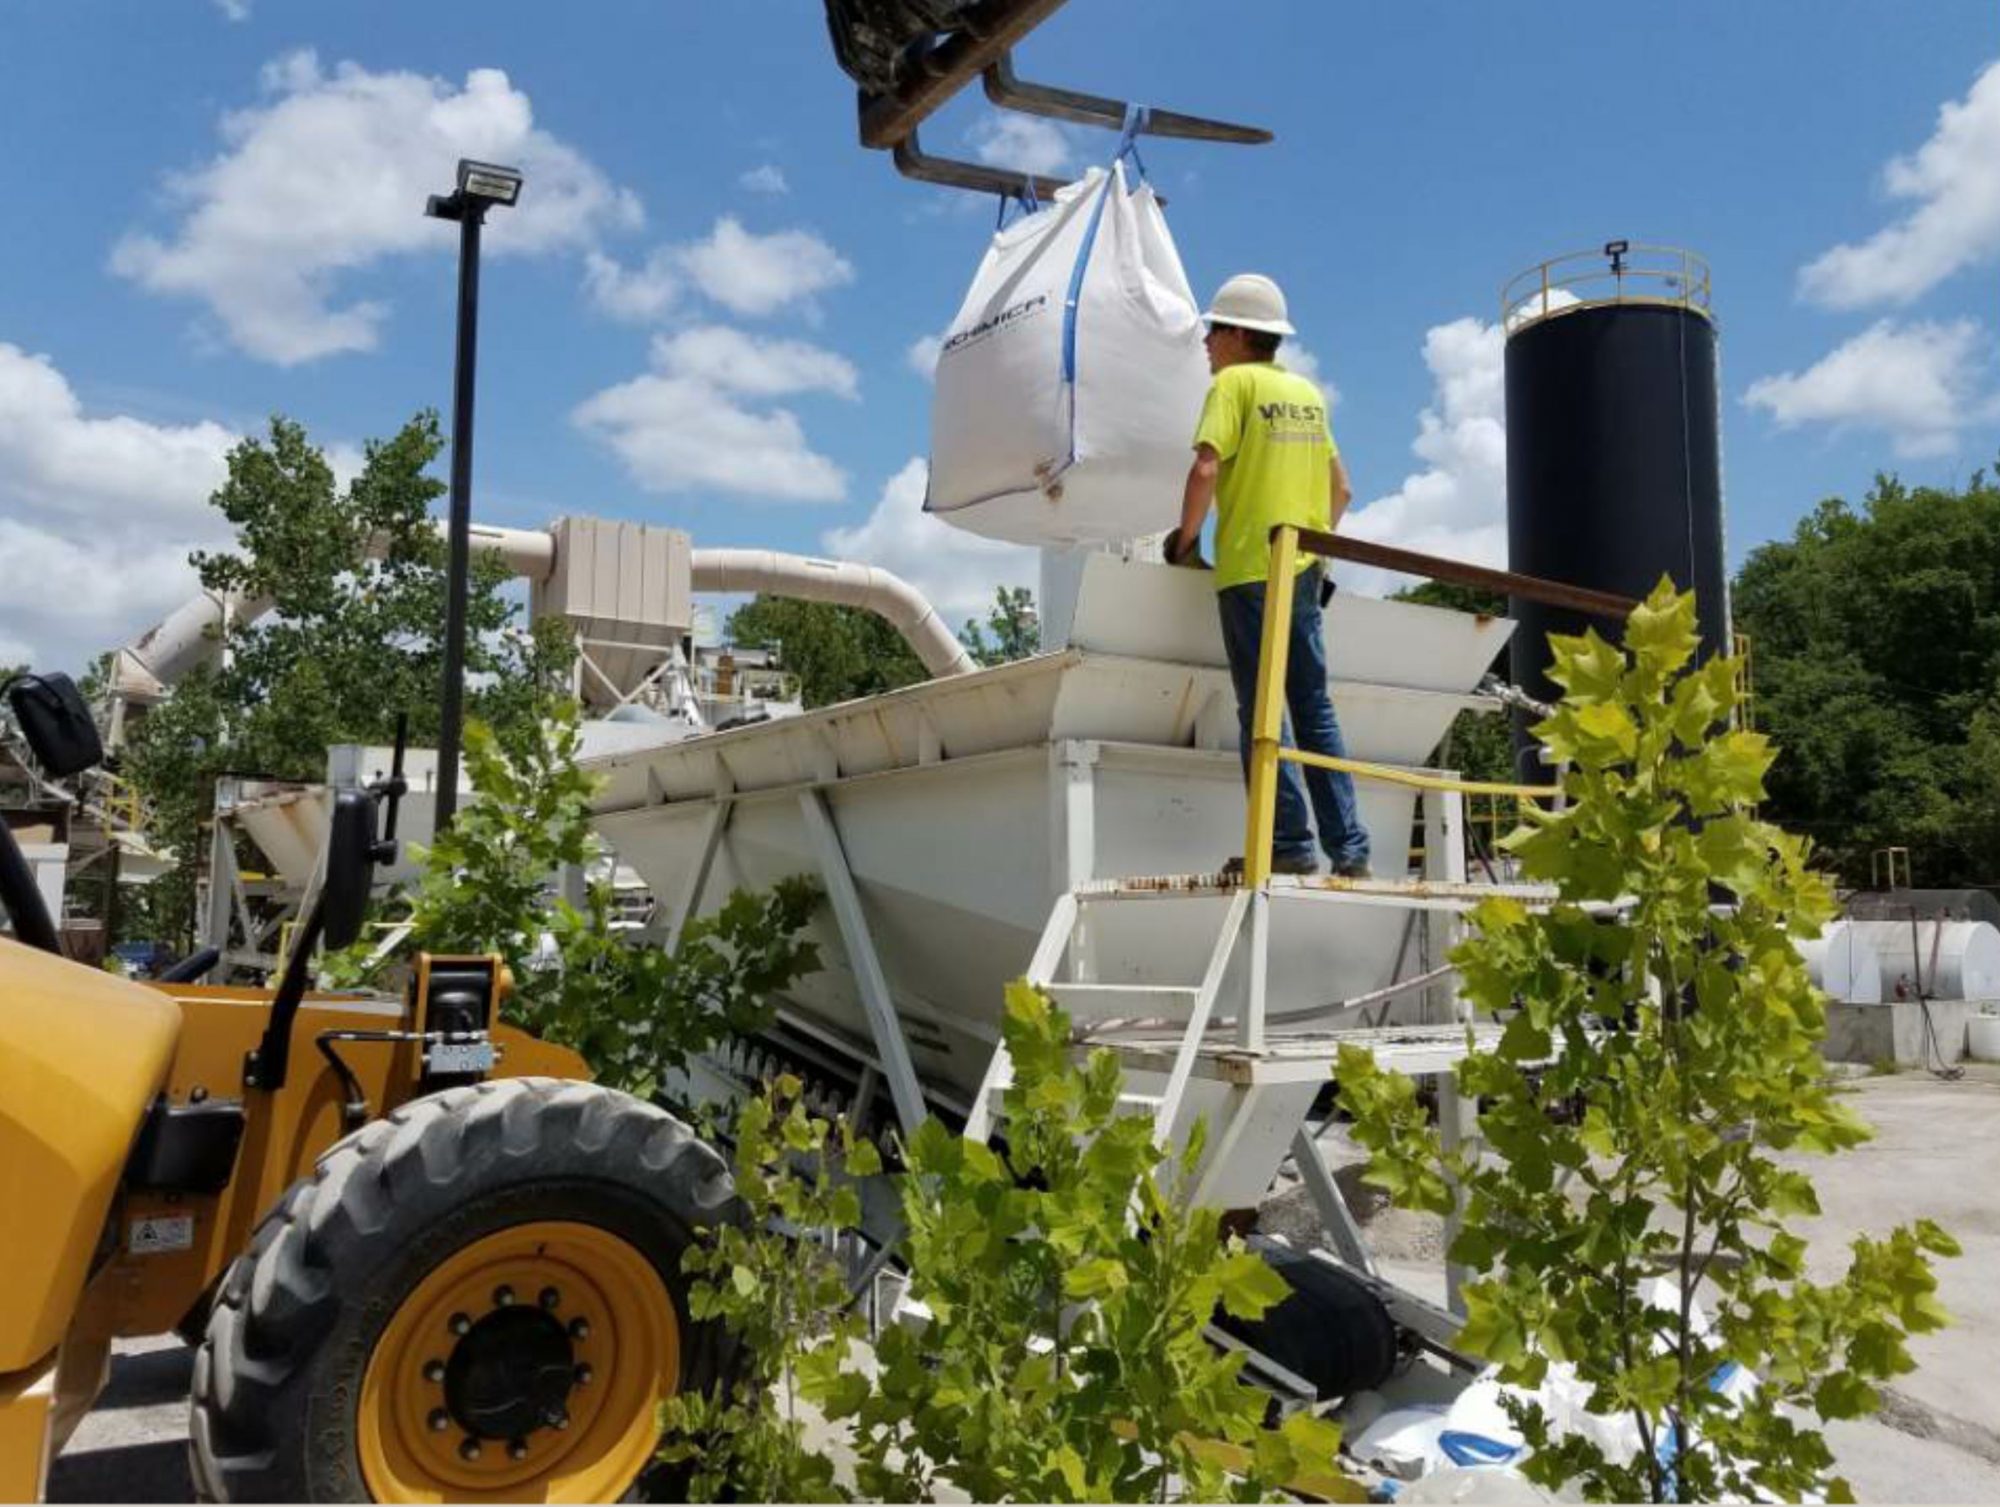 Personnel used the tines of a fork lift to hold the totes over the RAS bin, which metered the material into the mix at a target rate of 5 percent of total weight.